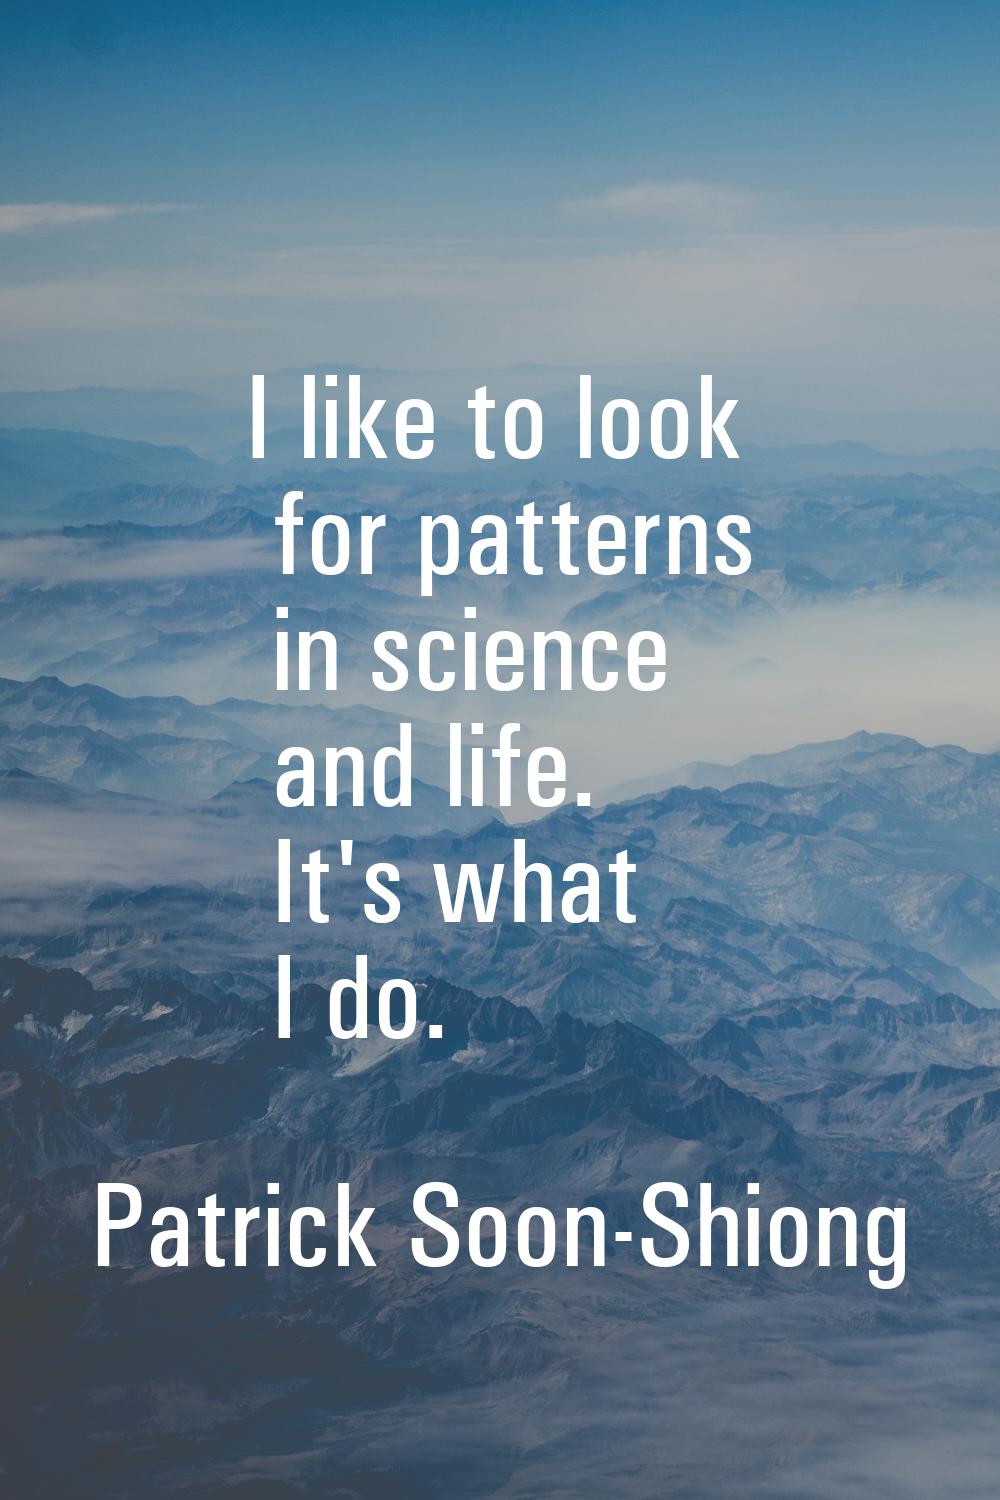 I like to look for patterns in science and life. It's what I do.